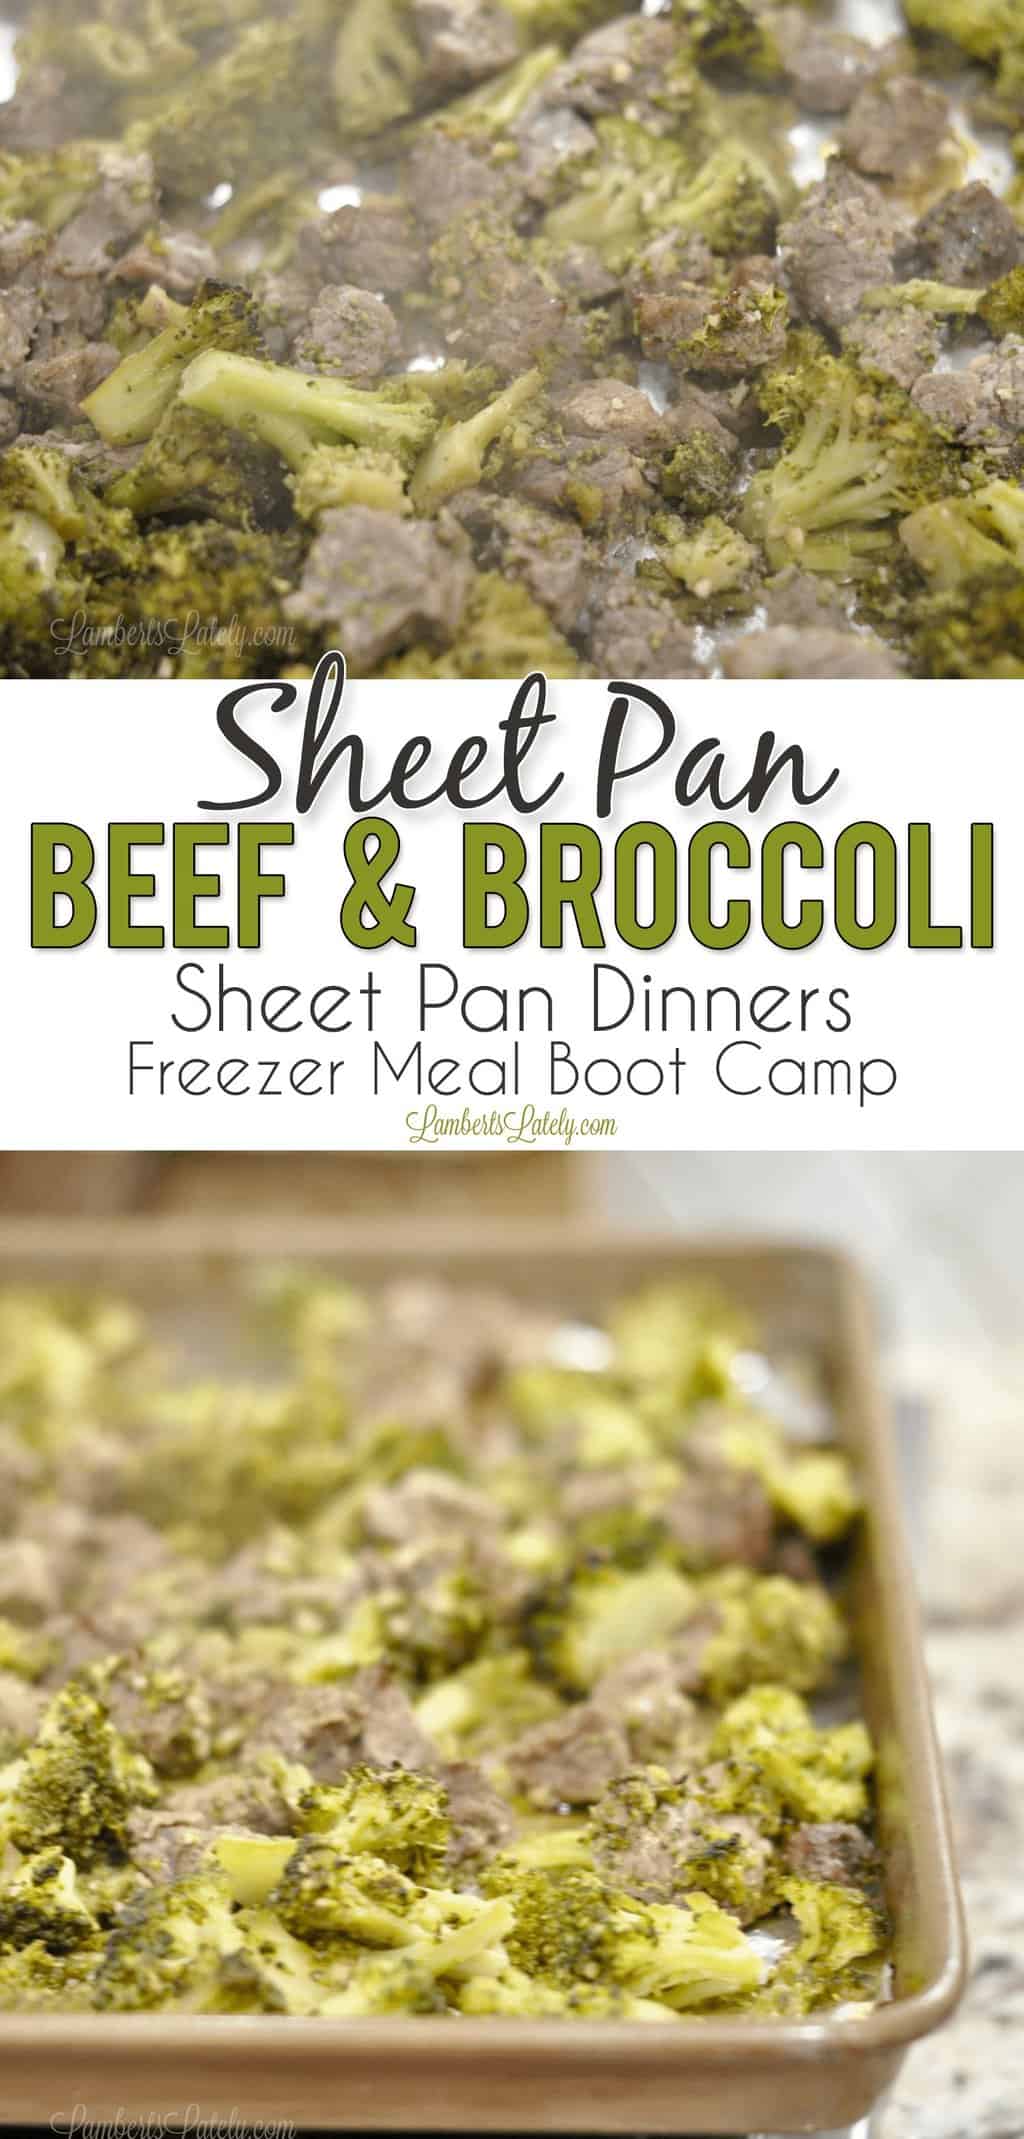 This sheet pan beef and broccoli combines pieces of steak and savory broccoli florets for a perfect flavor combination - goes perfectly over white rice! It's also a wonderful keto/low carb solution. Sheet pan dinners are such easy meals - they make for easy weeknight freezer meals too.